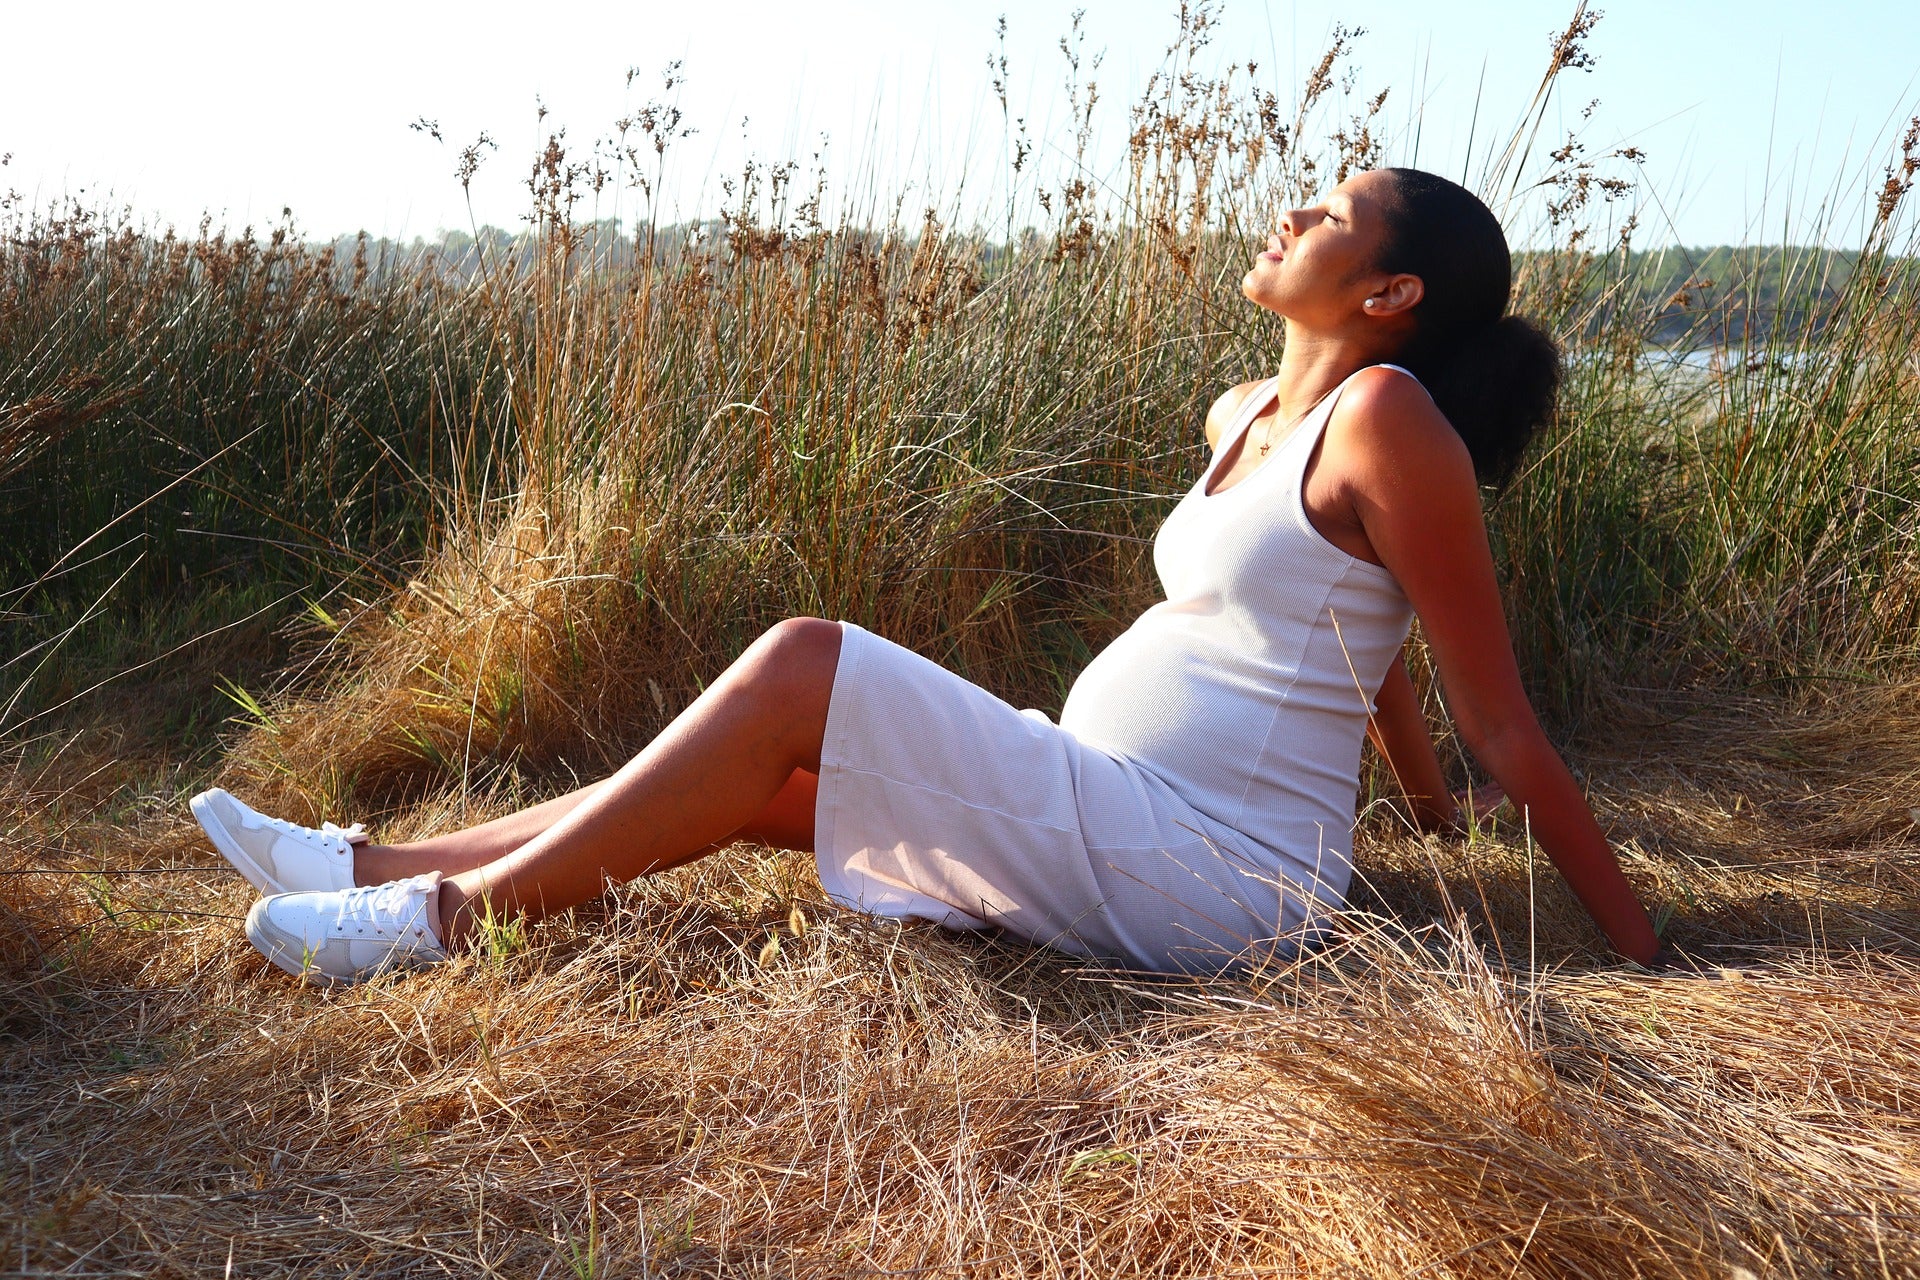 List of top 10 Maternity Dresses for a Perfect Maternity Photoshoot